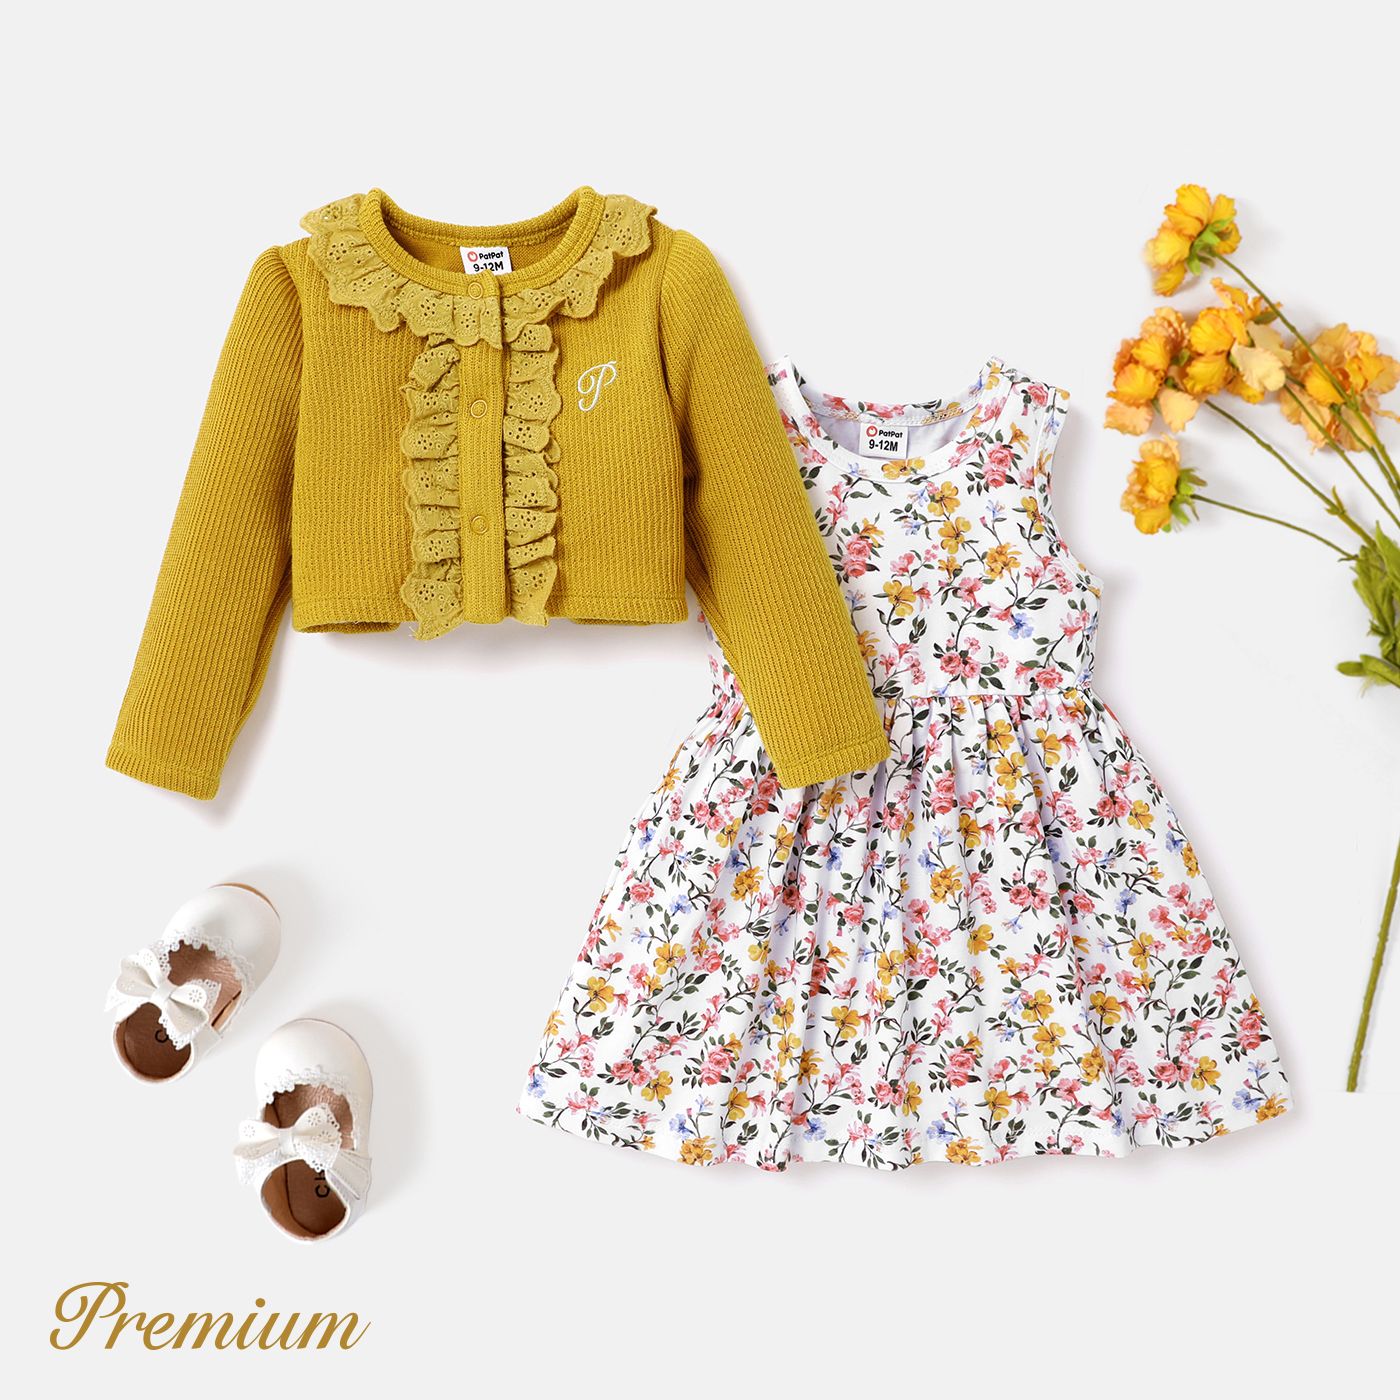 2pcs Elegant Floral Suit-dress For Baby Girl With Ruffle Edge